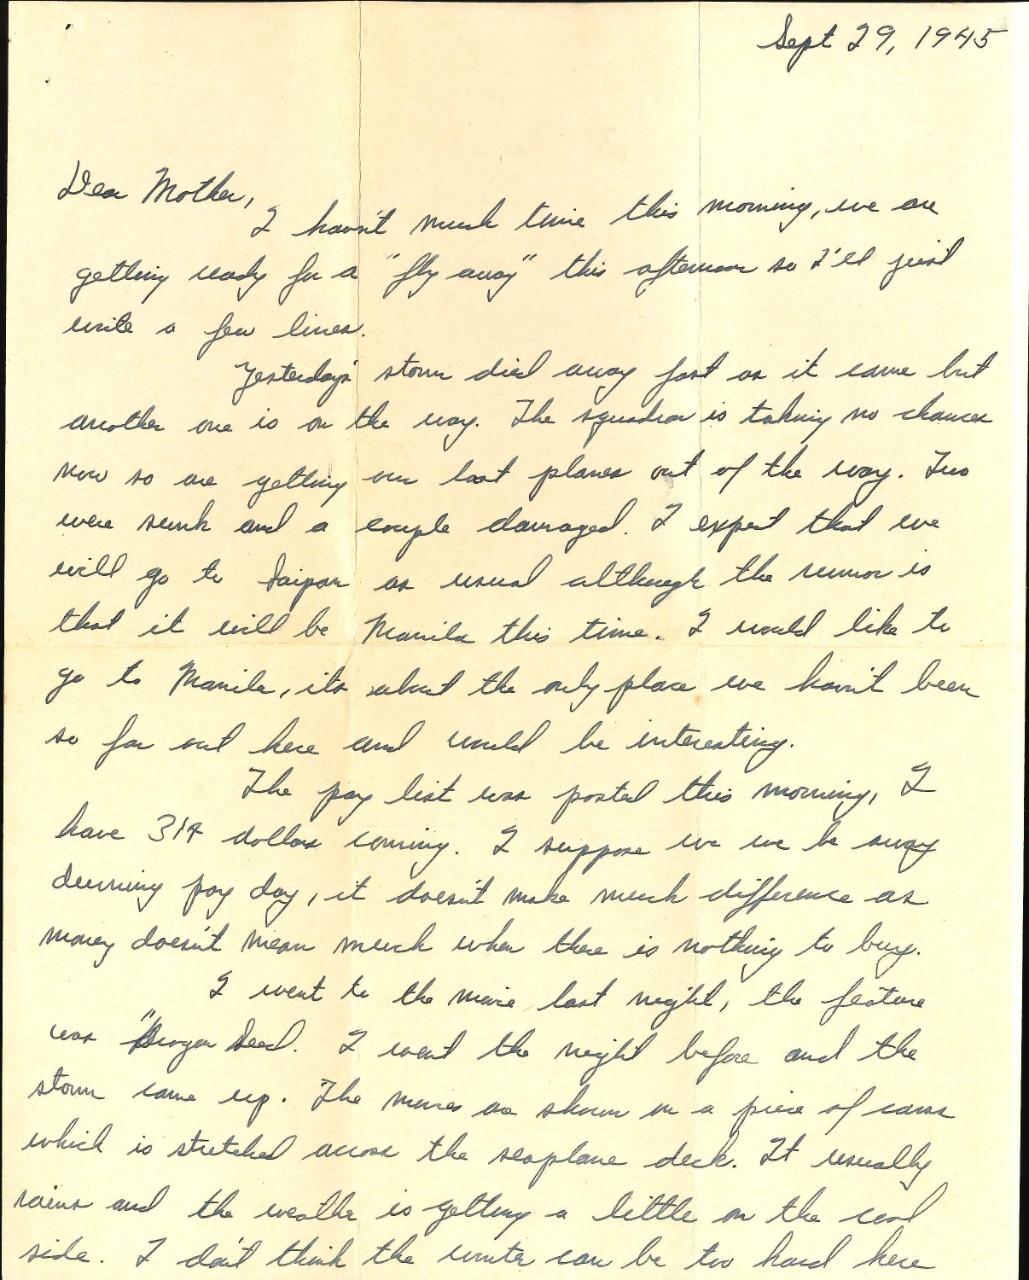 Letter from Charles W. Cooper to his parents, Sep. 29, 1945, page 1